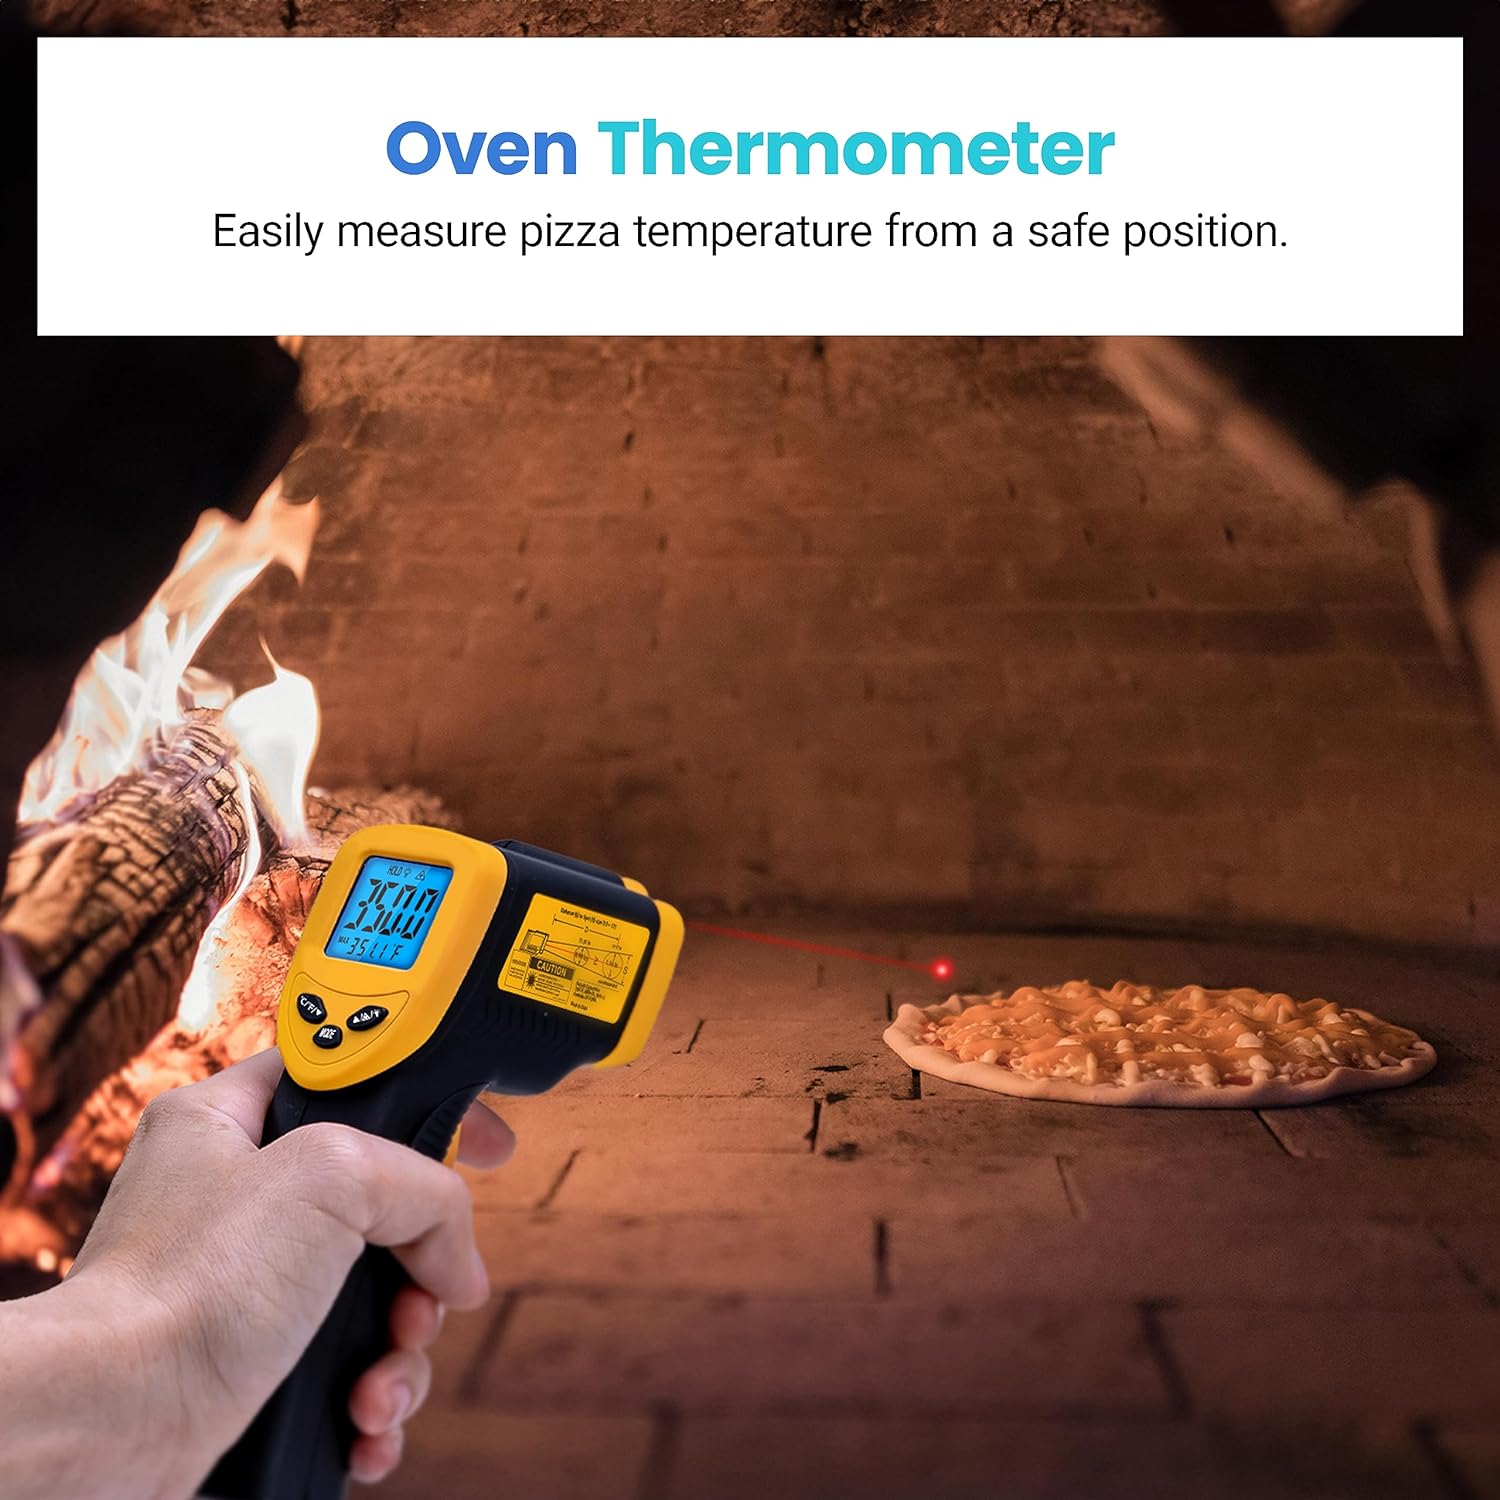 How To Use a Digital Laser Thermometer for Pizza Ovens